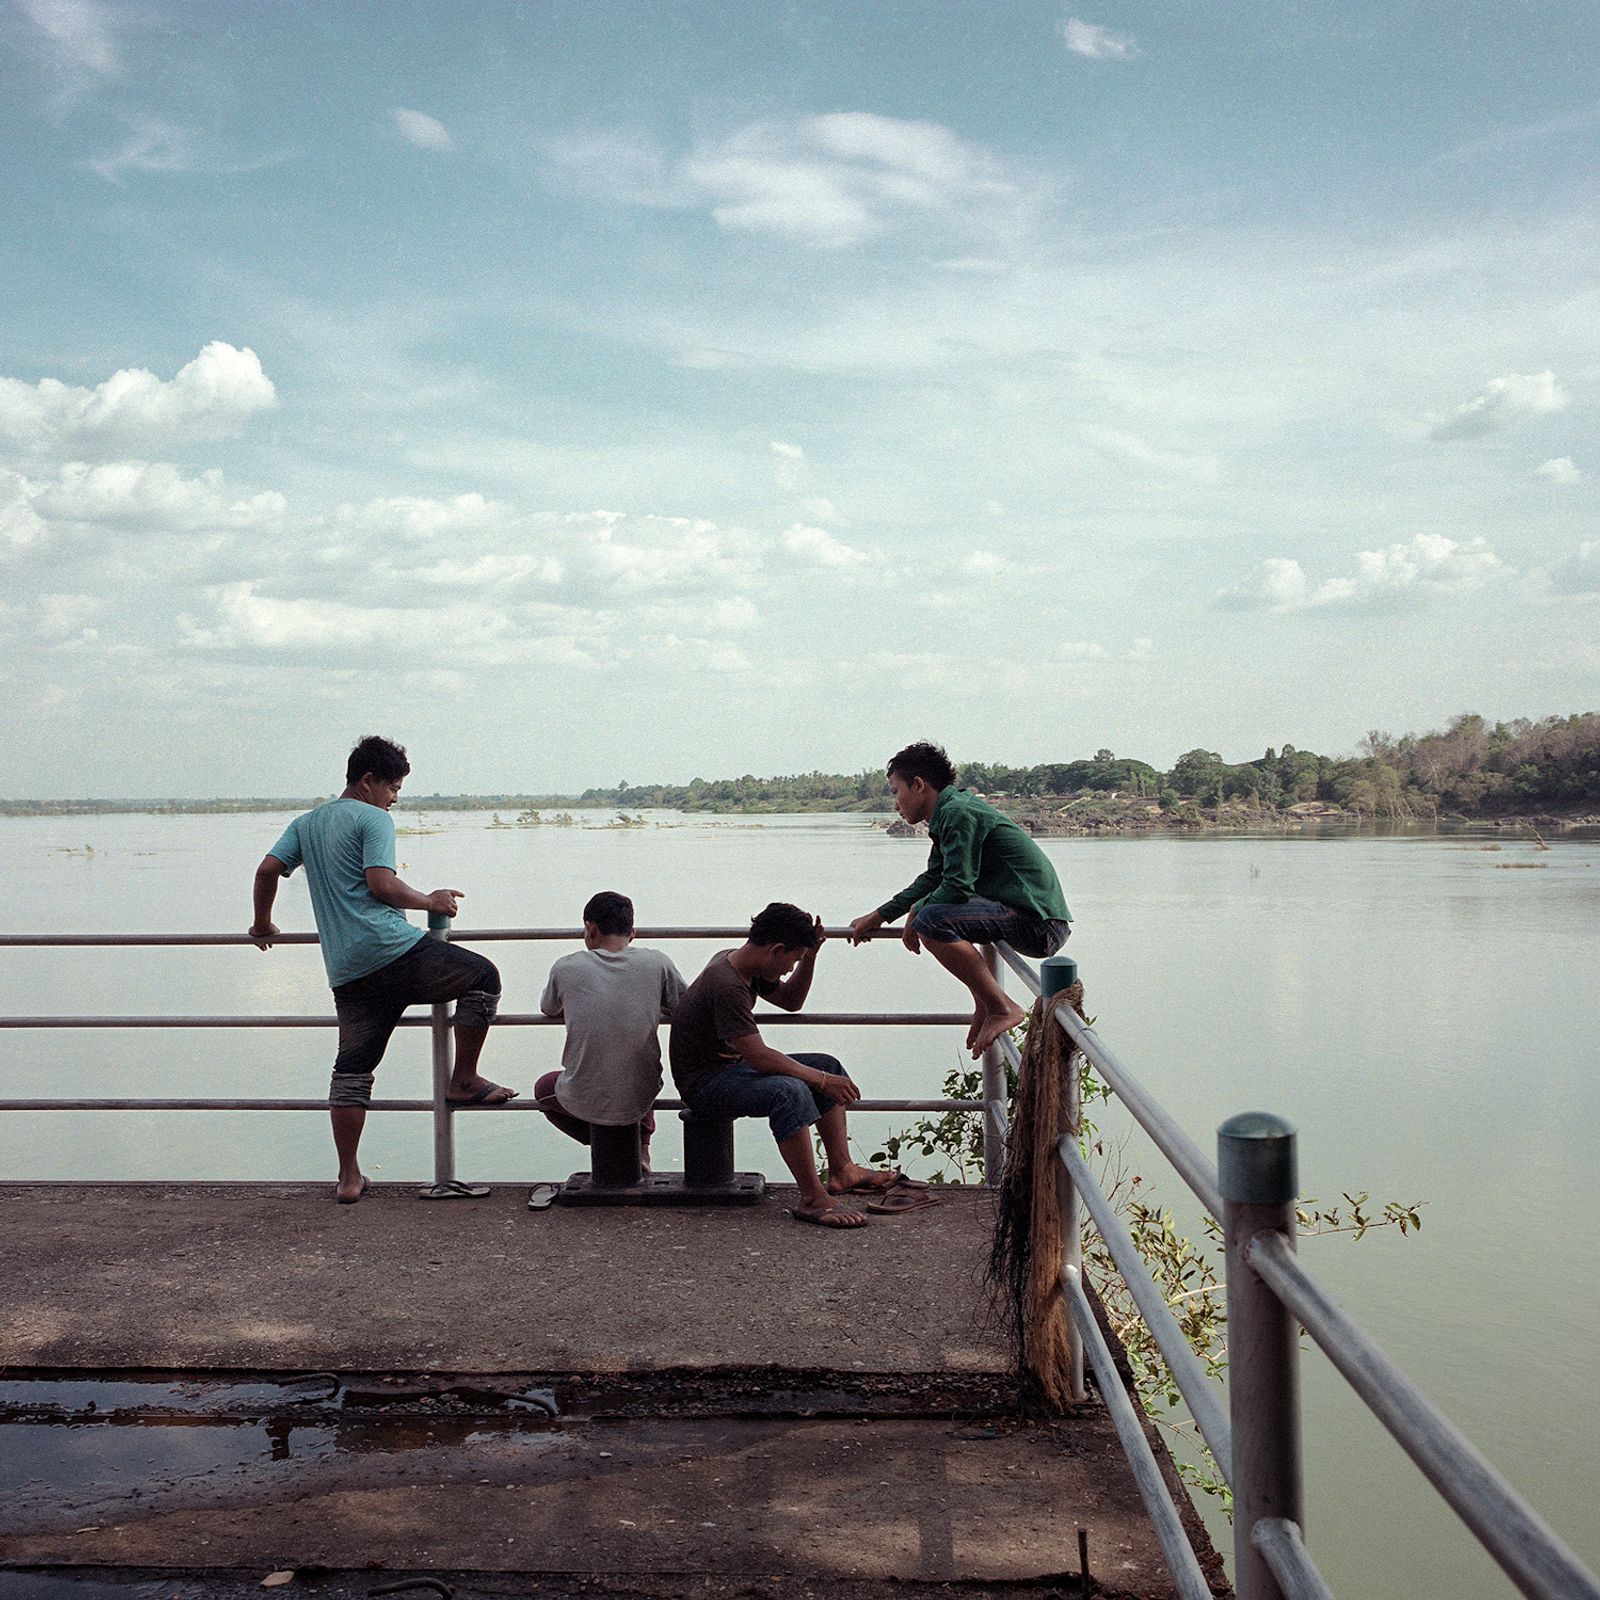 © Huiying Ore - Image from the Mekong, The mother of rivers photography project